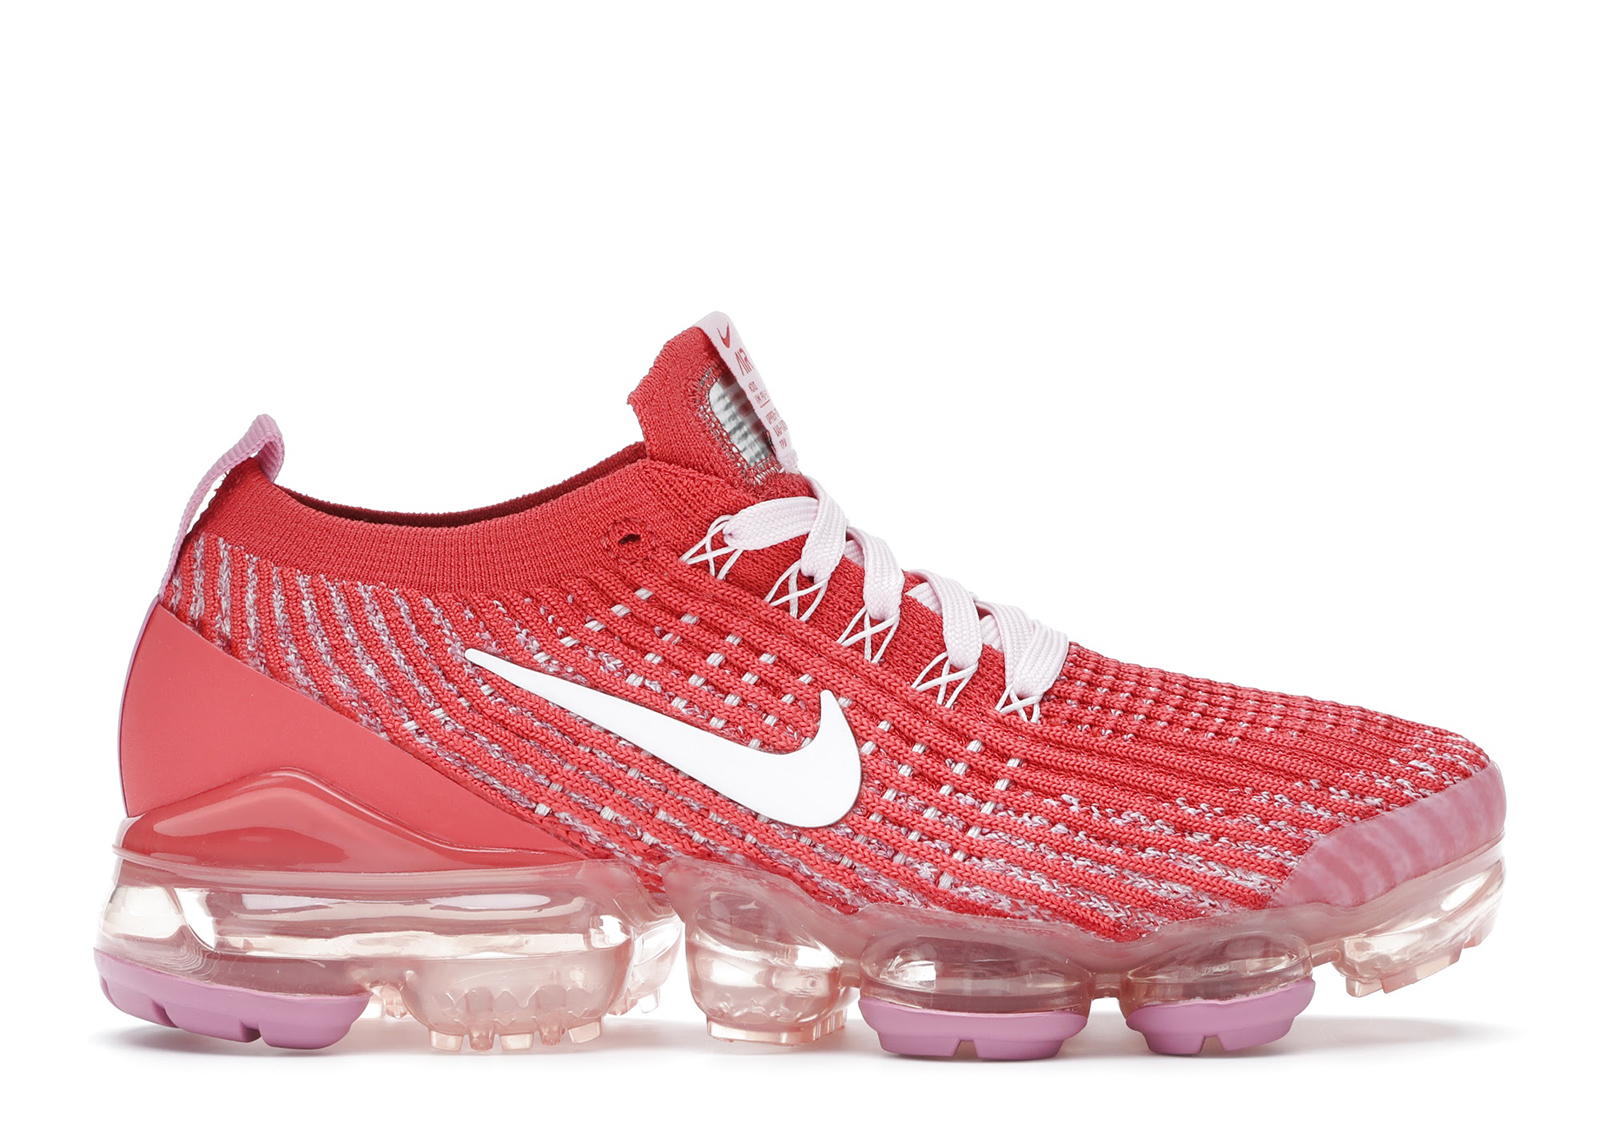 red and white vapormax flyknit